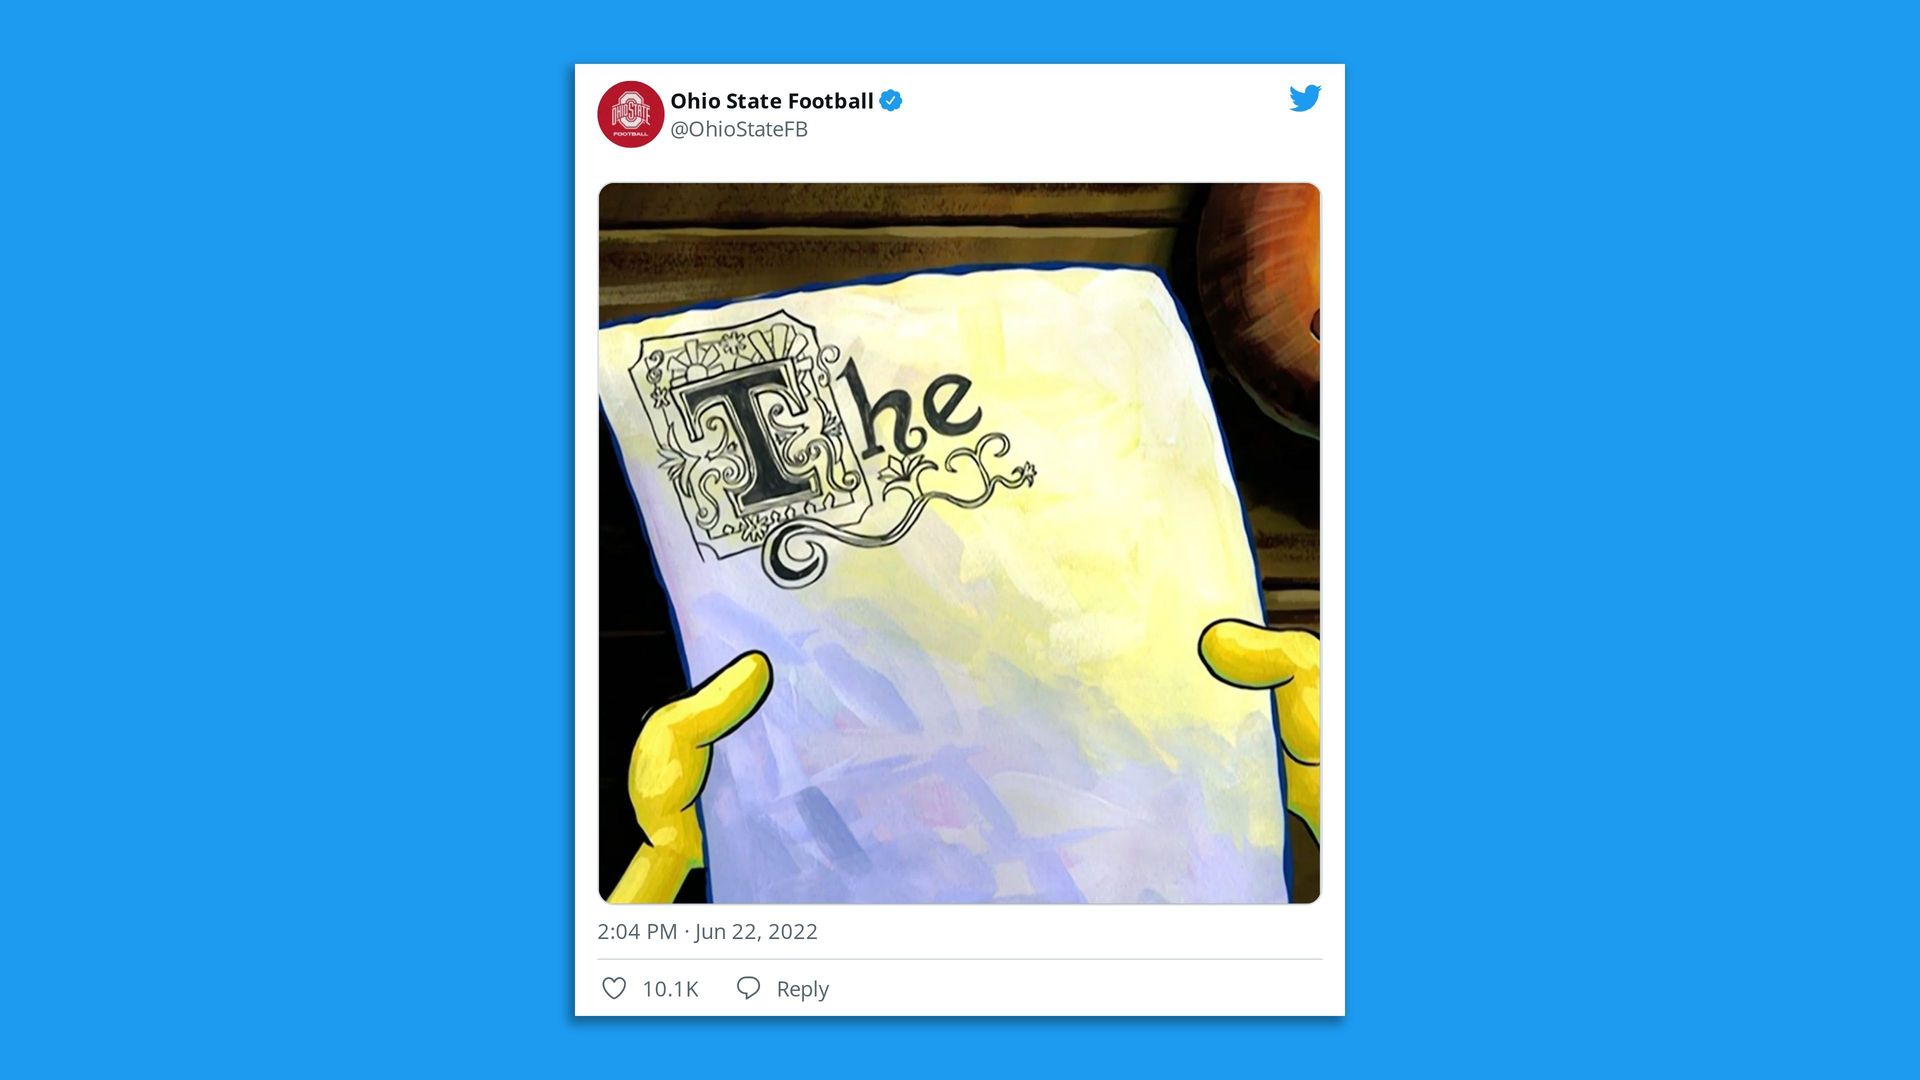 A tweet from Ohio State featuring a photo of a script "THE" from SpongeBob SquarePants